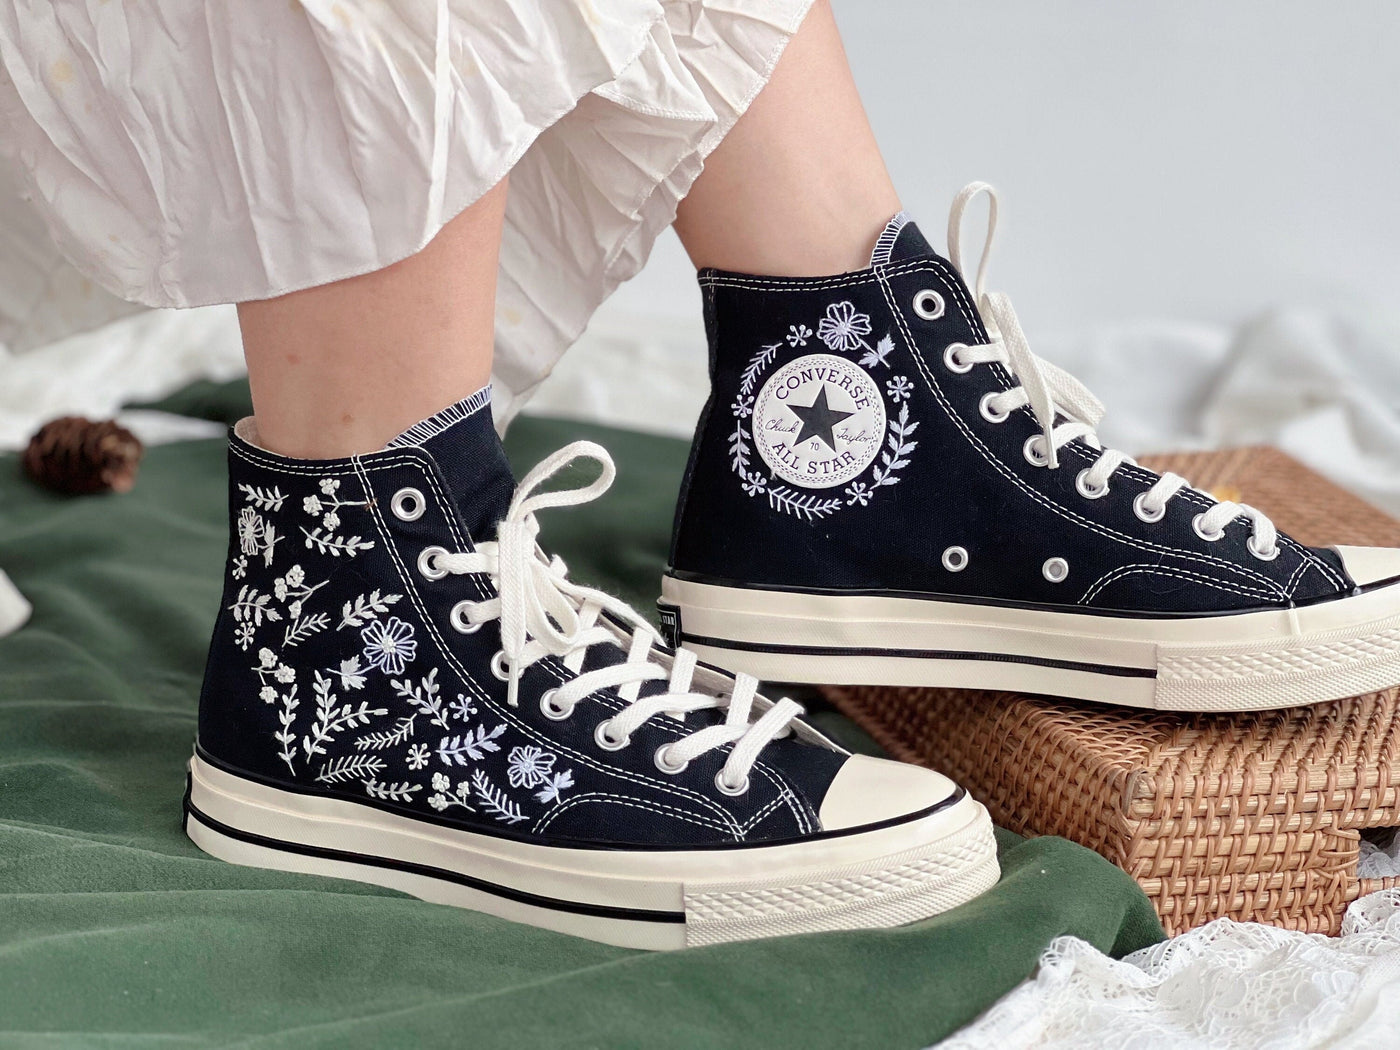 Embroidered Converse,Floral Converse,Embroidered Converse Chuck Taylor